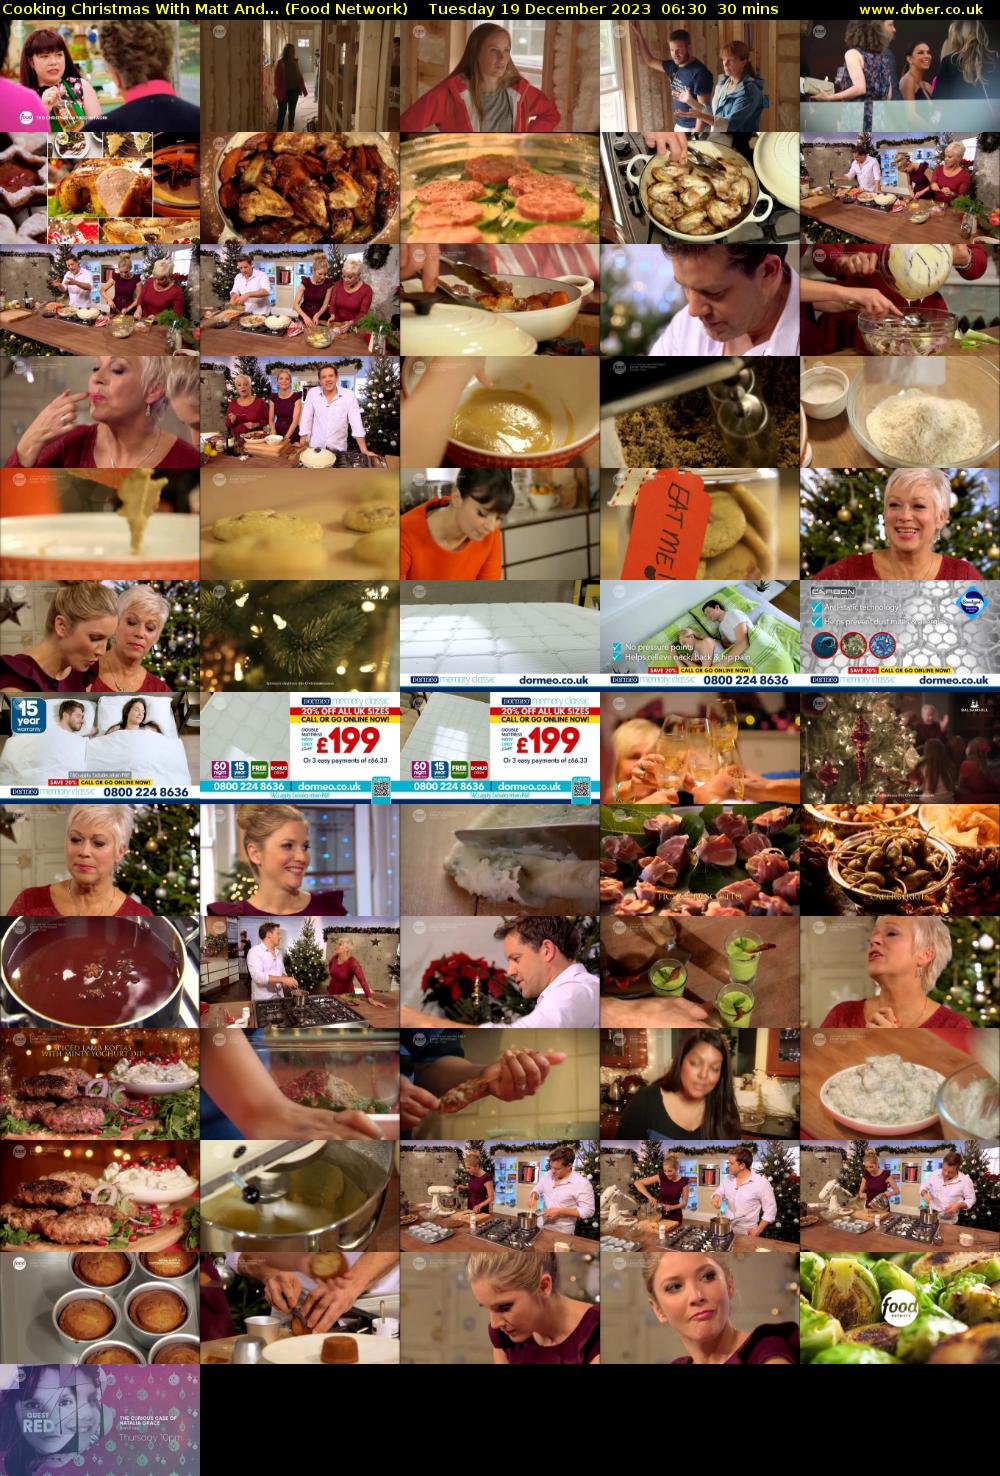 Cooking Christmas With Matt And... (Food Network) Tuesday 19 December 2023 06:30 - 07:00